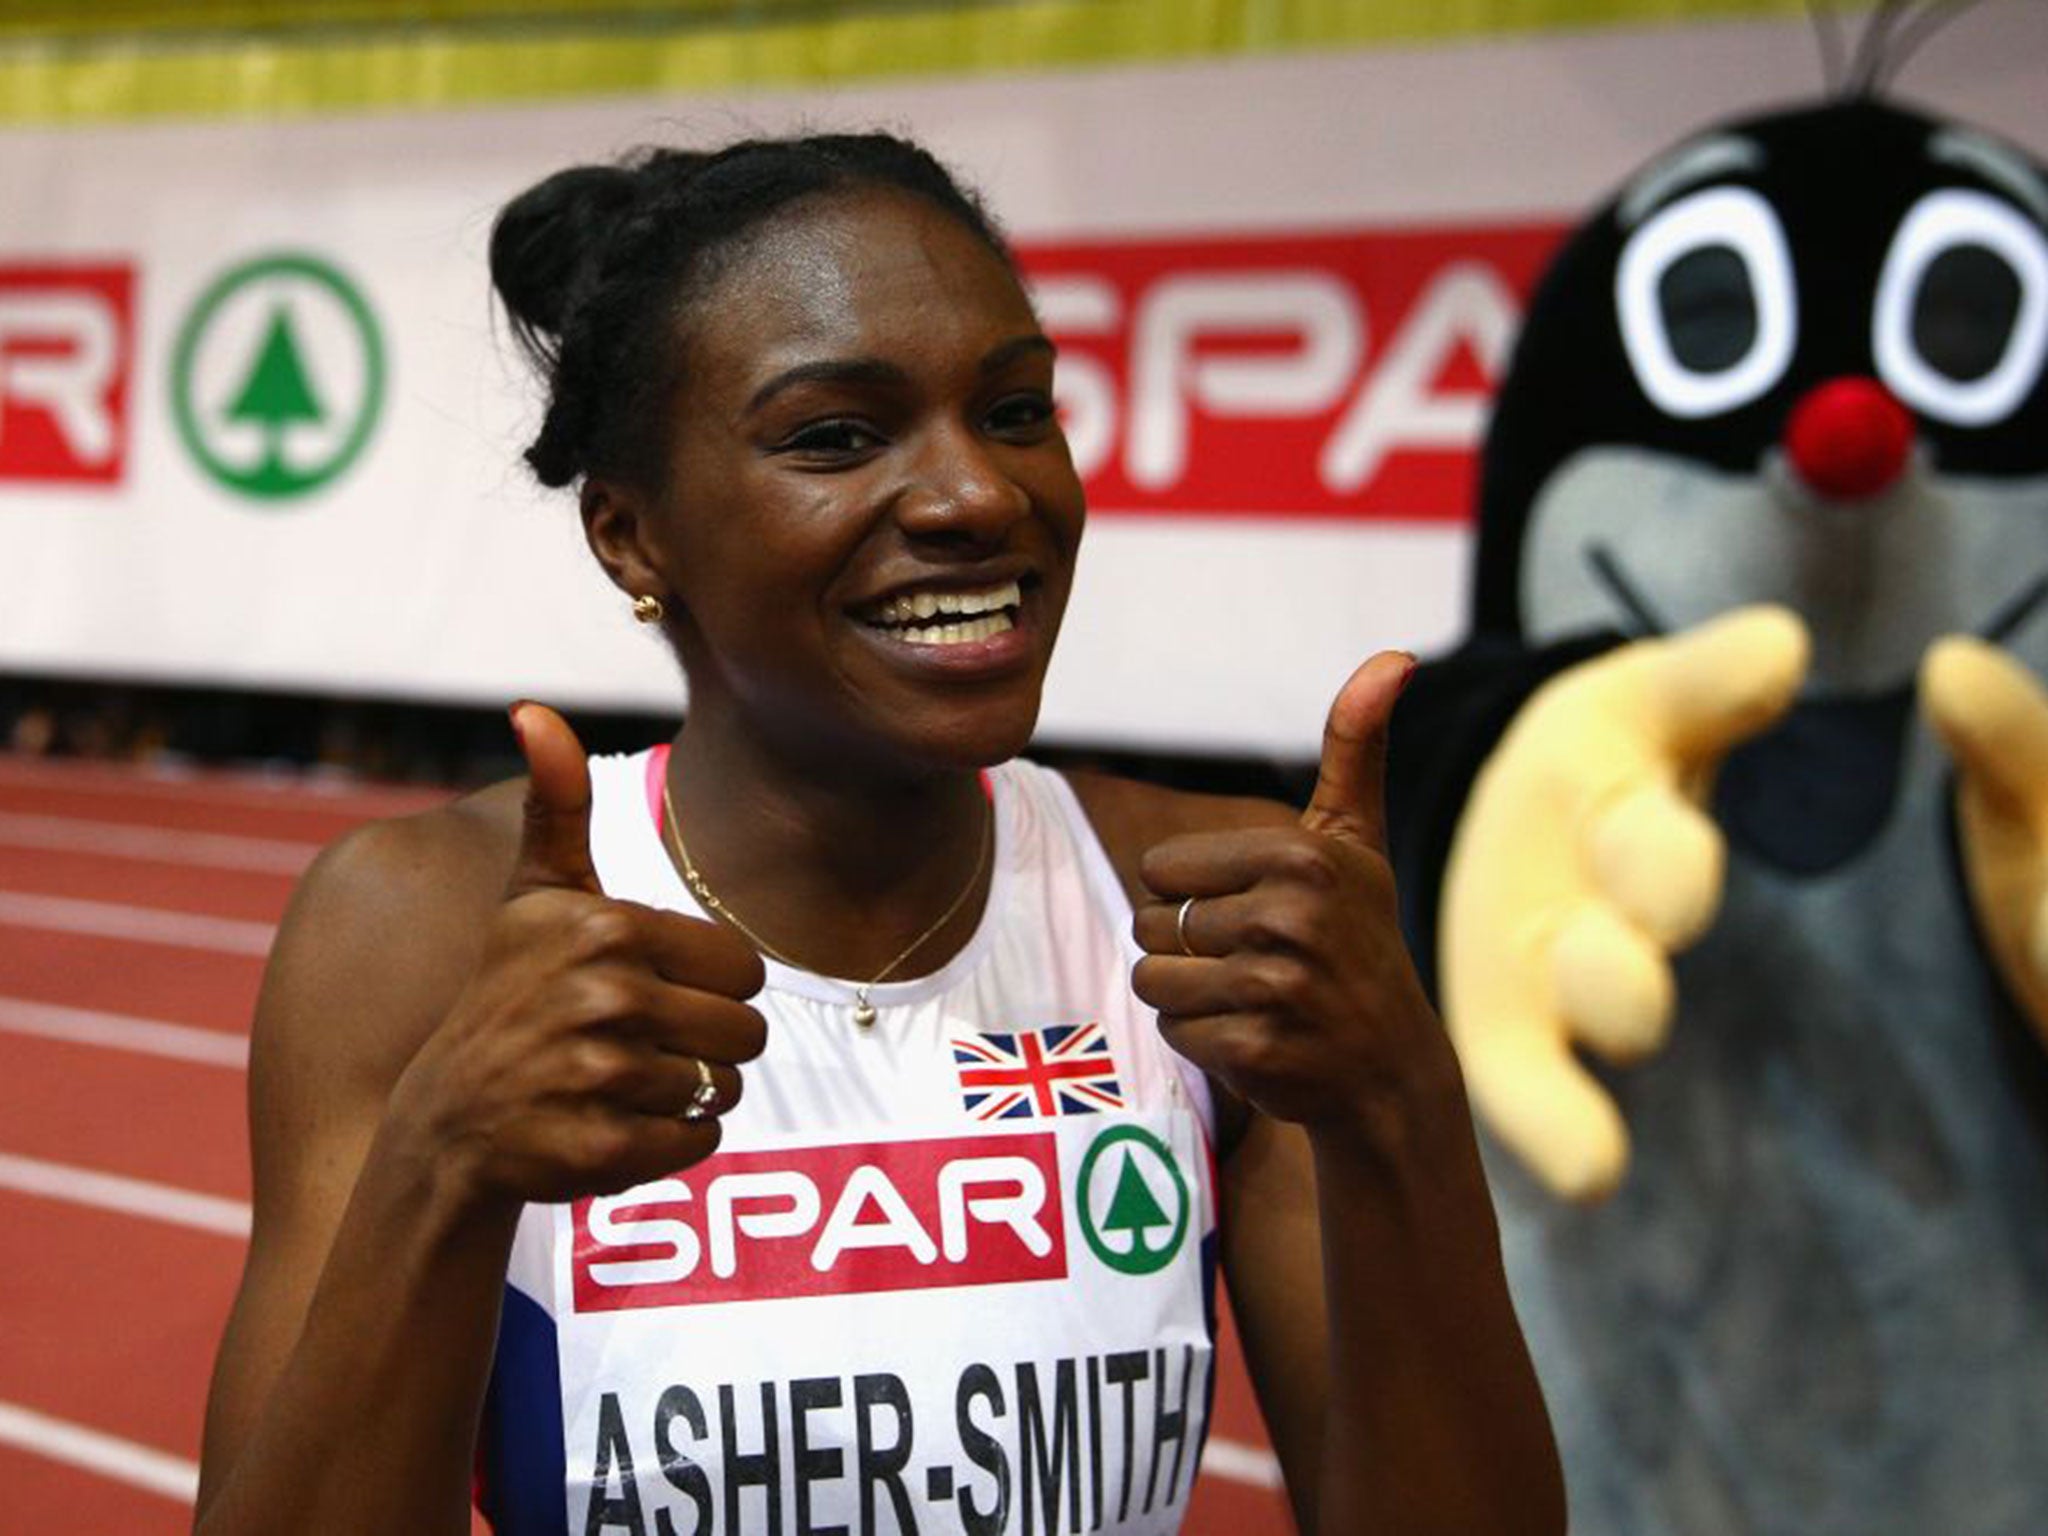 Dina Asher-Smith showed exactly what she is capable of by breaking the British 100m record last month